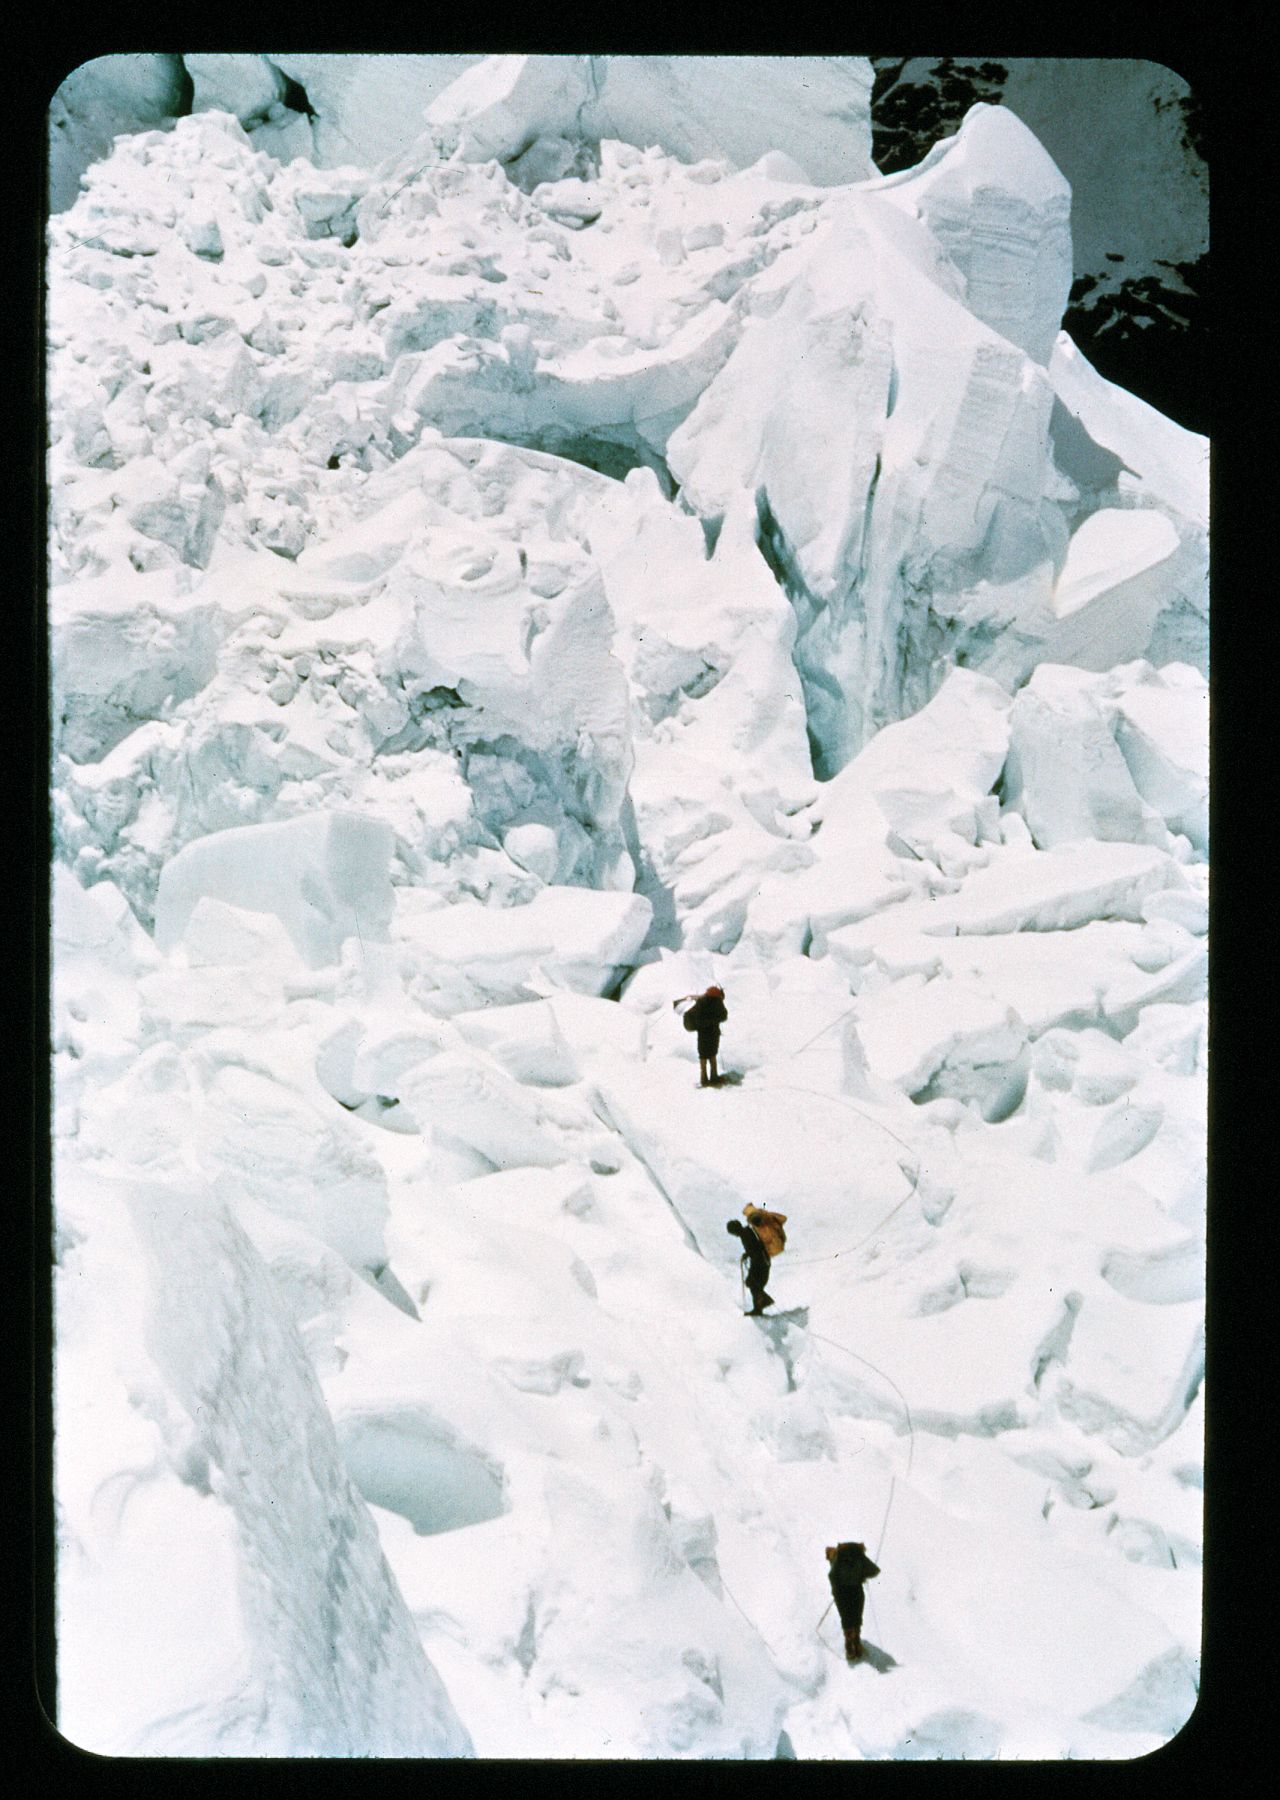 The Khumbu Icefall is also where expedition member Jake Breitenbach lost his life when the ice became unstable and buried him (not pictured).